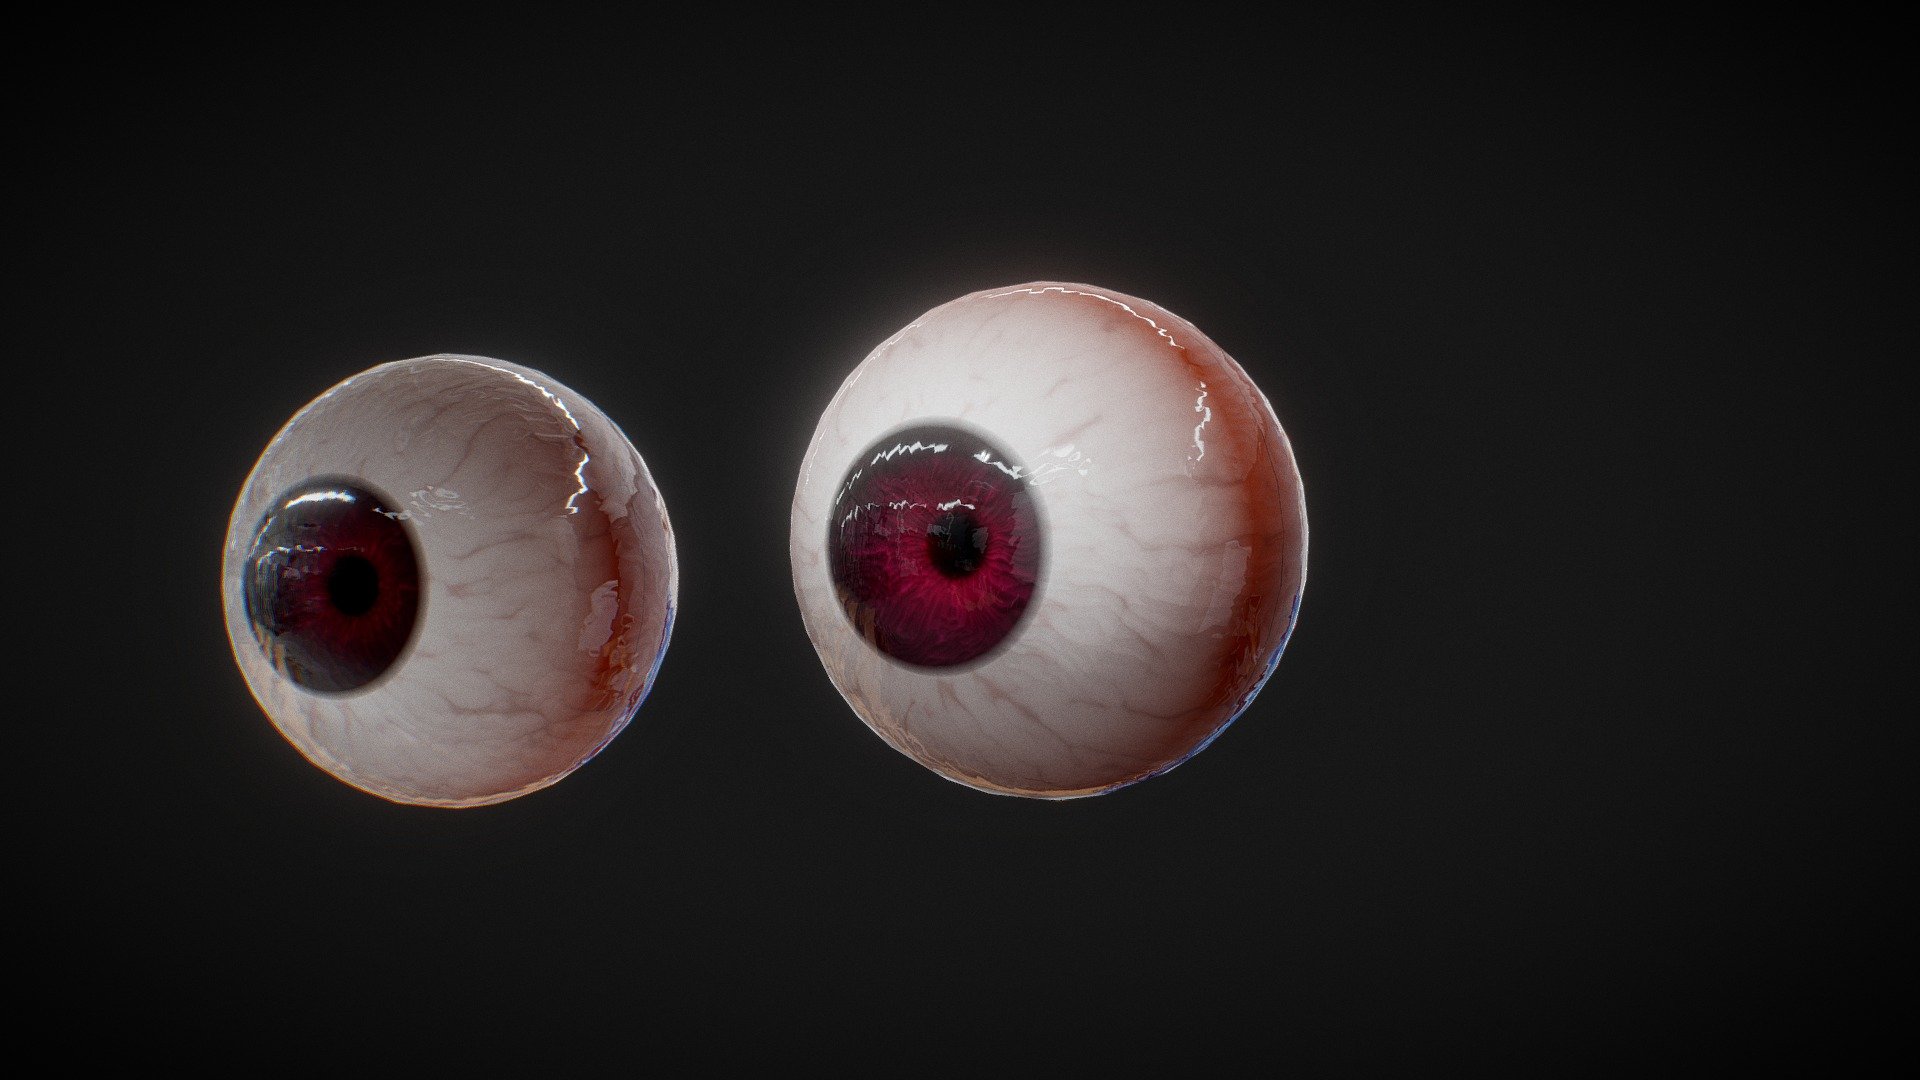 Procedural Eyes shader can work and tweak on Blender (find project files(.blend) in my Patreon), and are baked for Sketchfab.(Including iris, Sclera and Cornea)

Every like, comment, and subscription will support me to go further!

I have not lived in a relaxed and affluent situation. Patreon subscriptions can help me invest more in artwork. You can also find project files(.blend) in my Patreon. The part I created and produced will be released under the CC-BY license. Welcome to use them! 

Any quote will greatly encourage me, please don't forget to tell me after a quote! I also accept modeling commission. Please contact (chambersu1996@gmail.com) 3d model